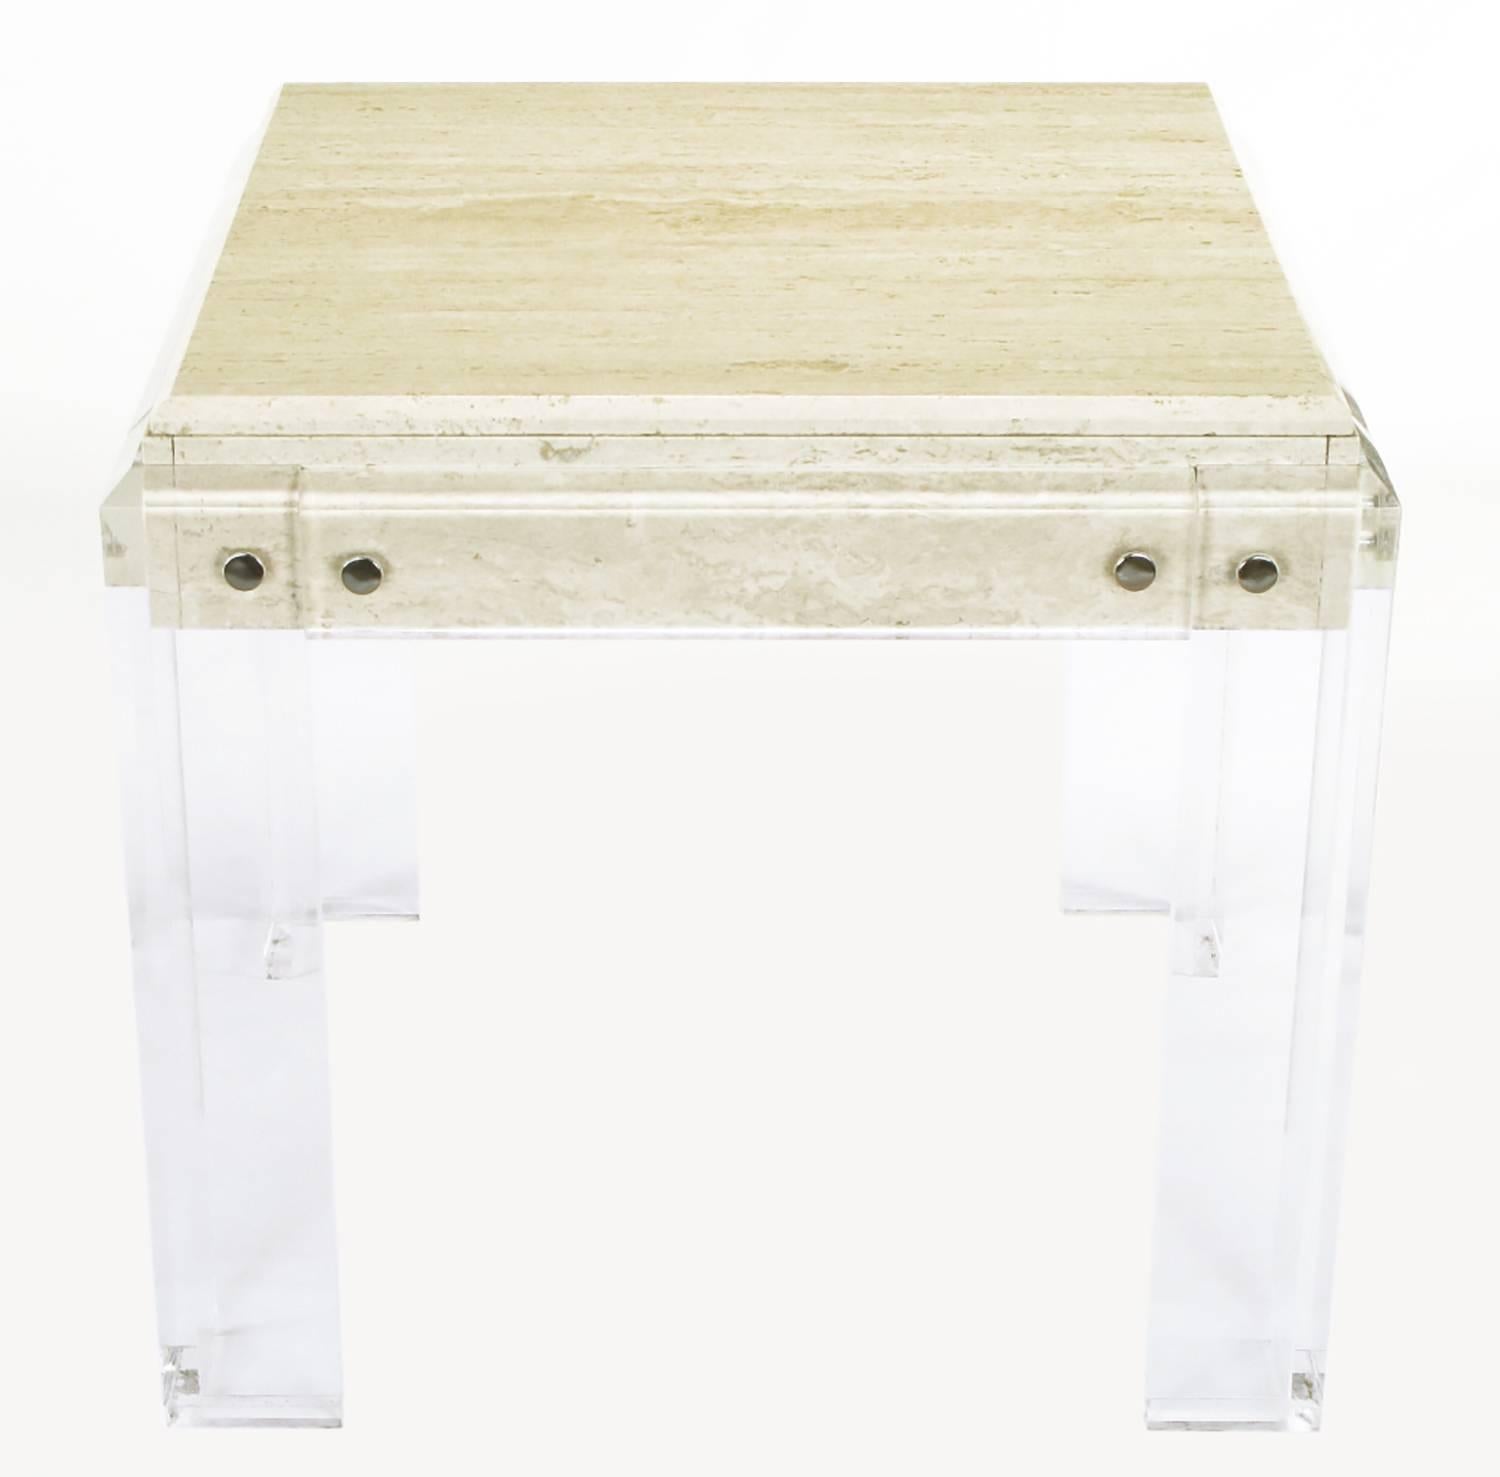 Postmodern game table with Lucite legs and apron. Travertine beveled edge top with travertine panels behind the Lucite apron. Large chrome finishes cylindrical cap nuts.